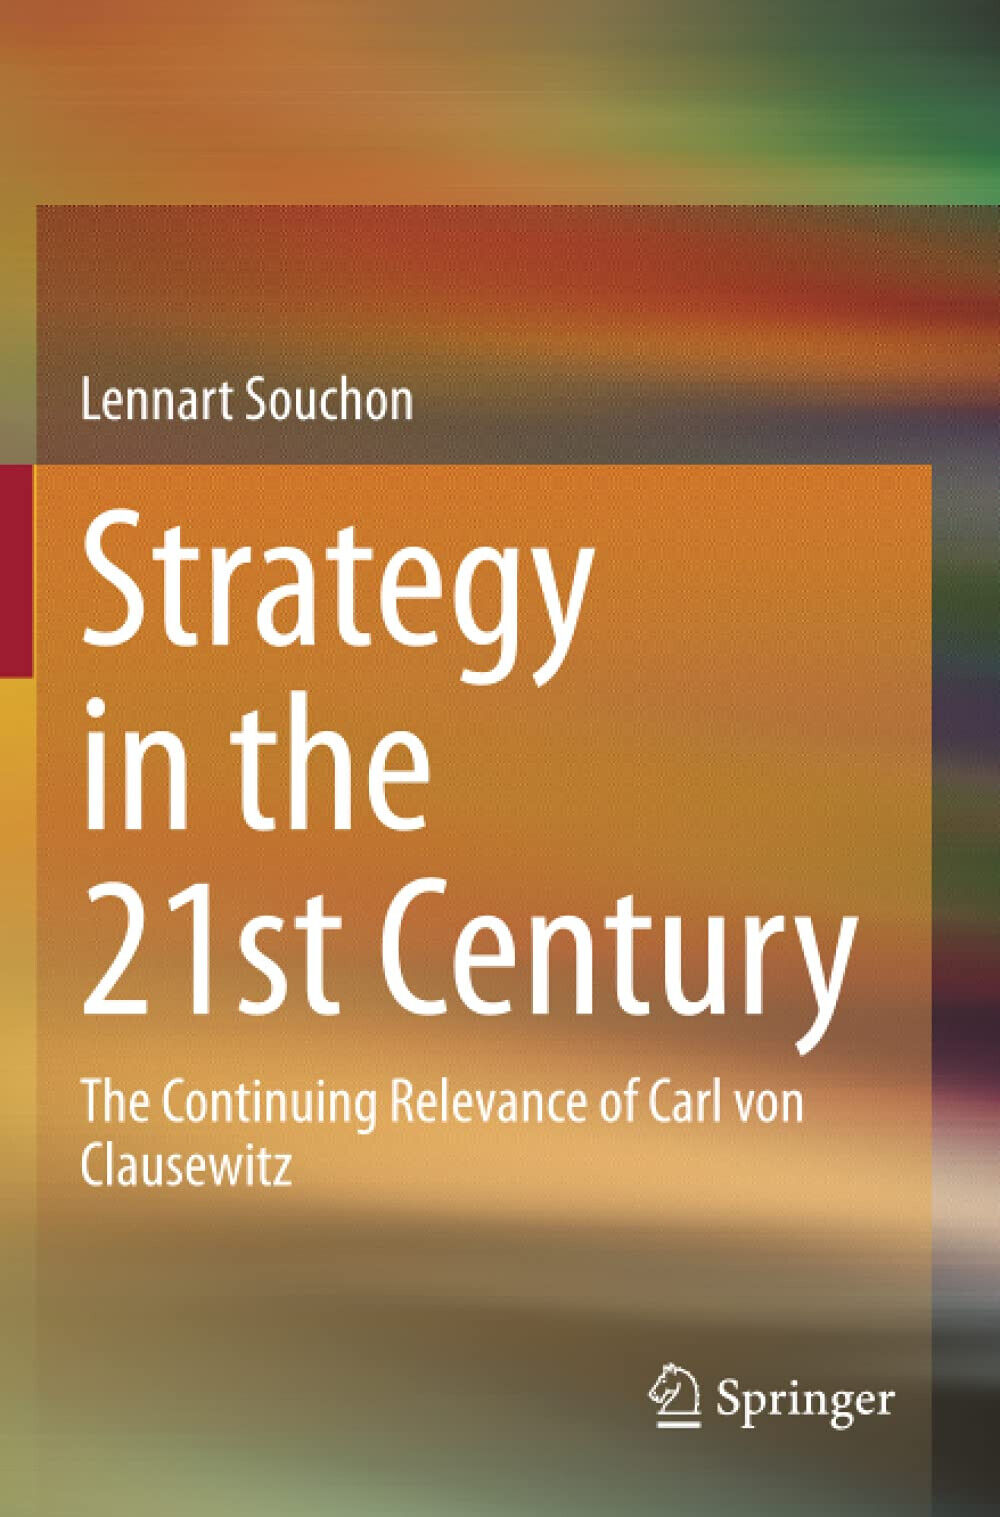 Strategy in the 21st Century - Lennart Souchon - Springer, 2021